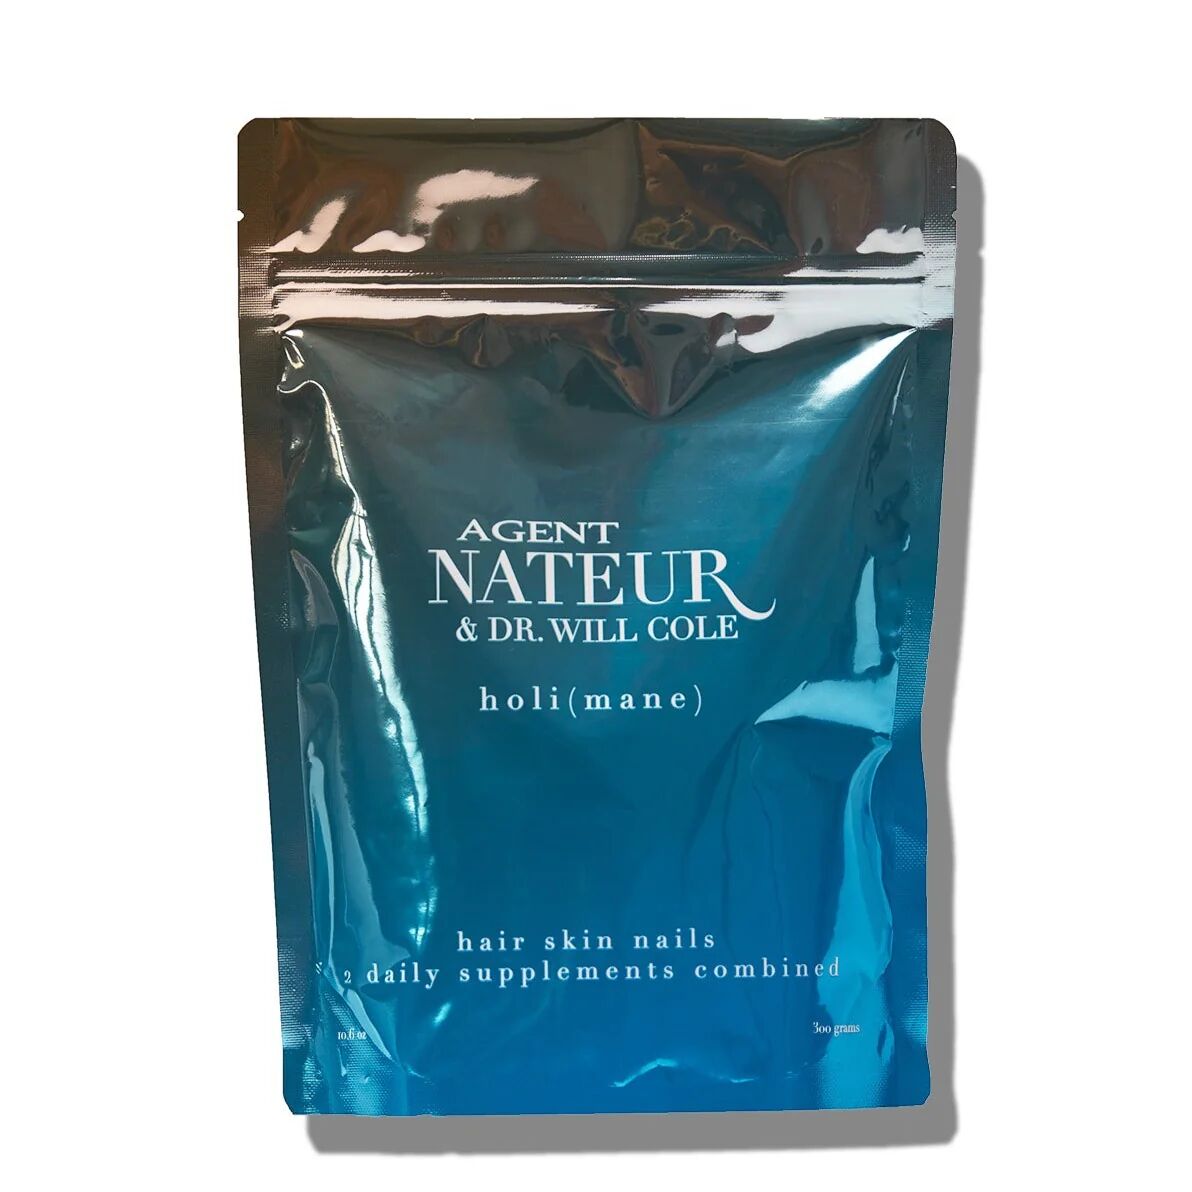 Agent Nateur Holi (Mane) Hair, Skin, Nails, 2 Daily Combined  10.6 oz